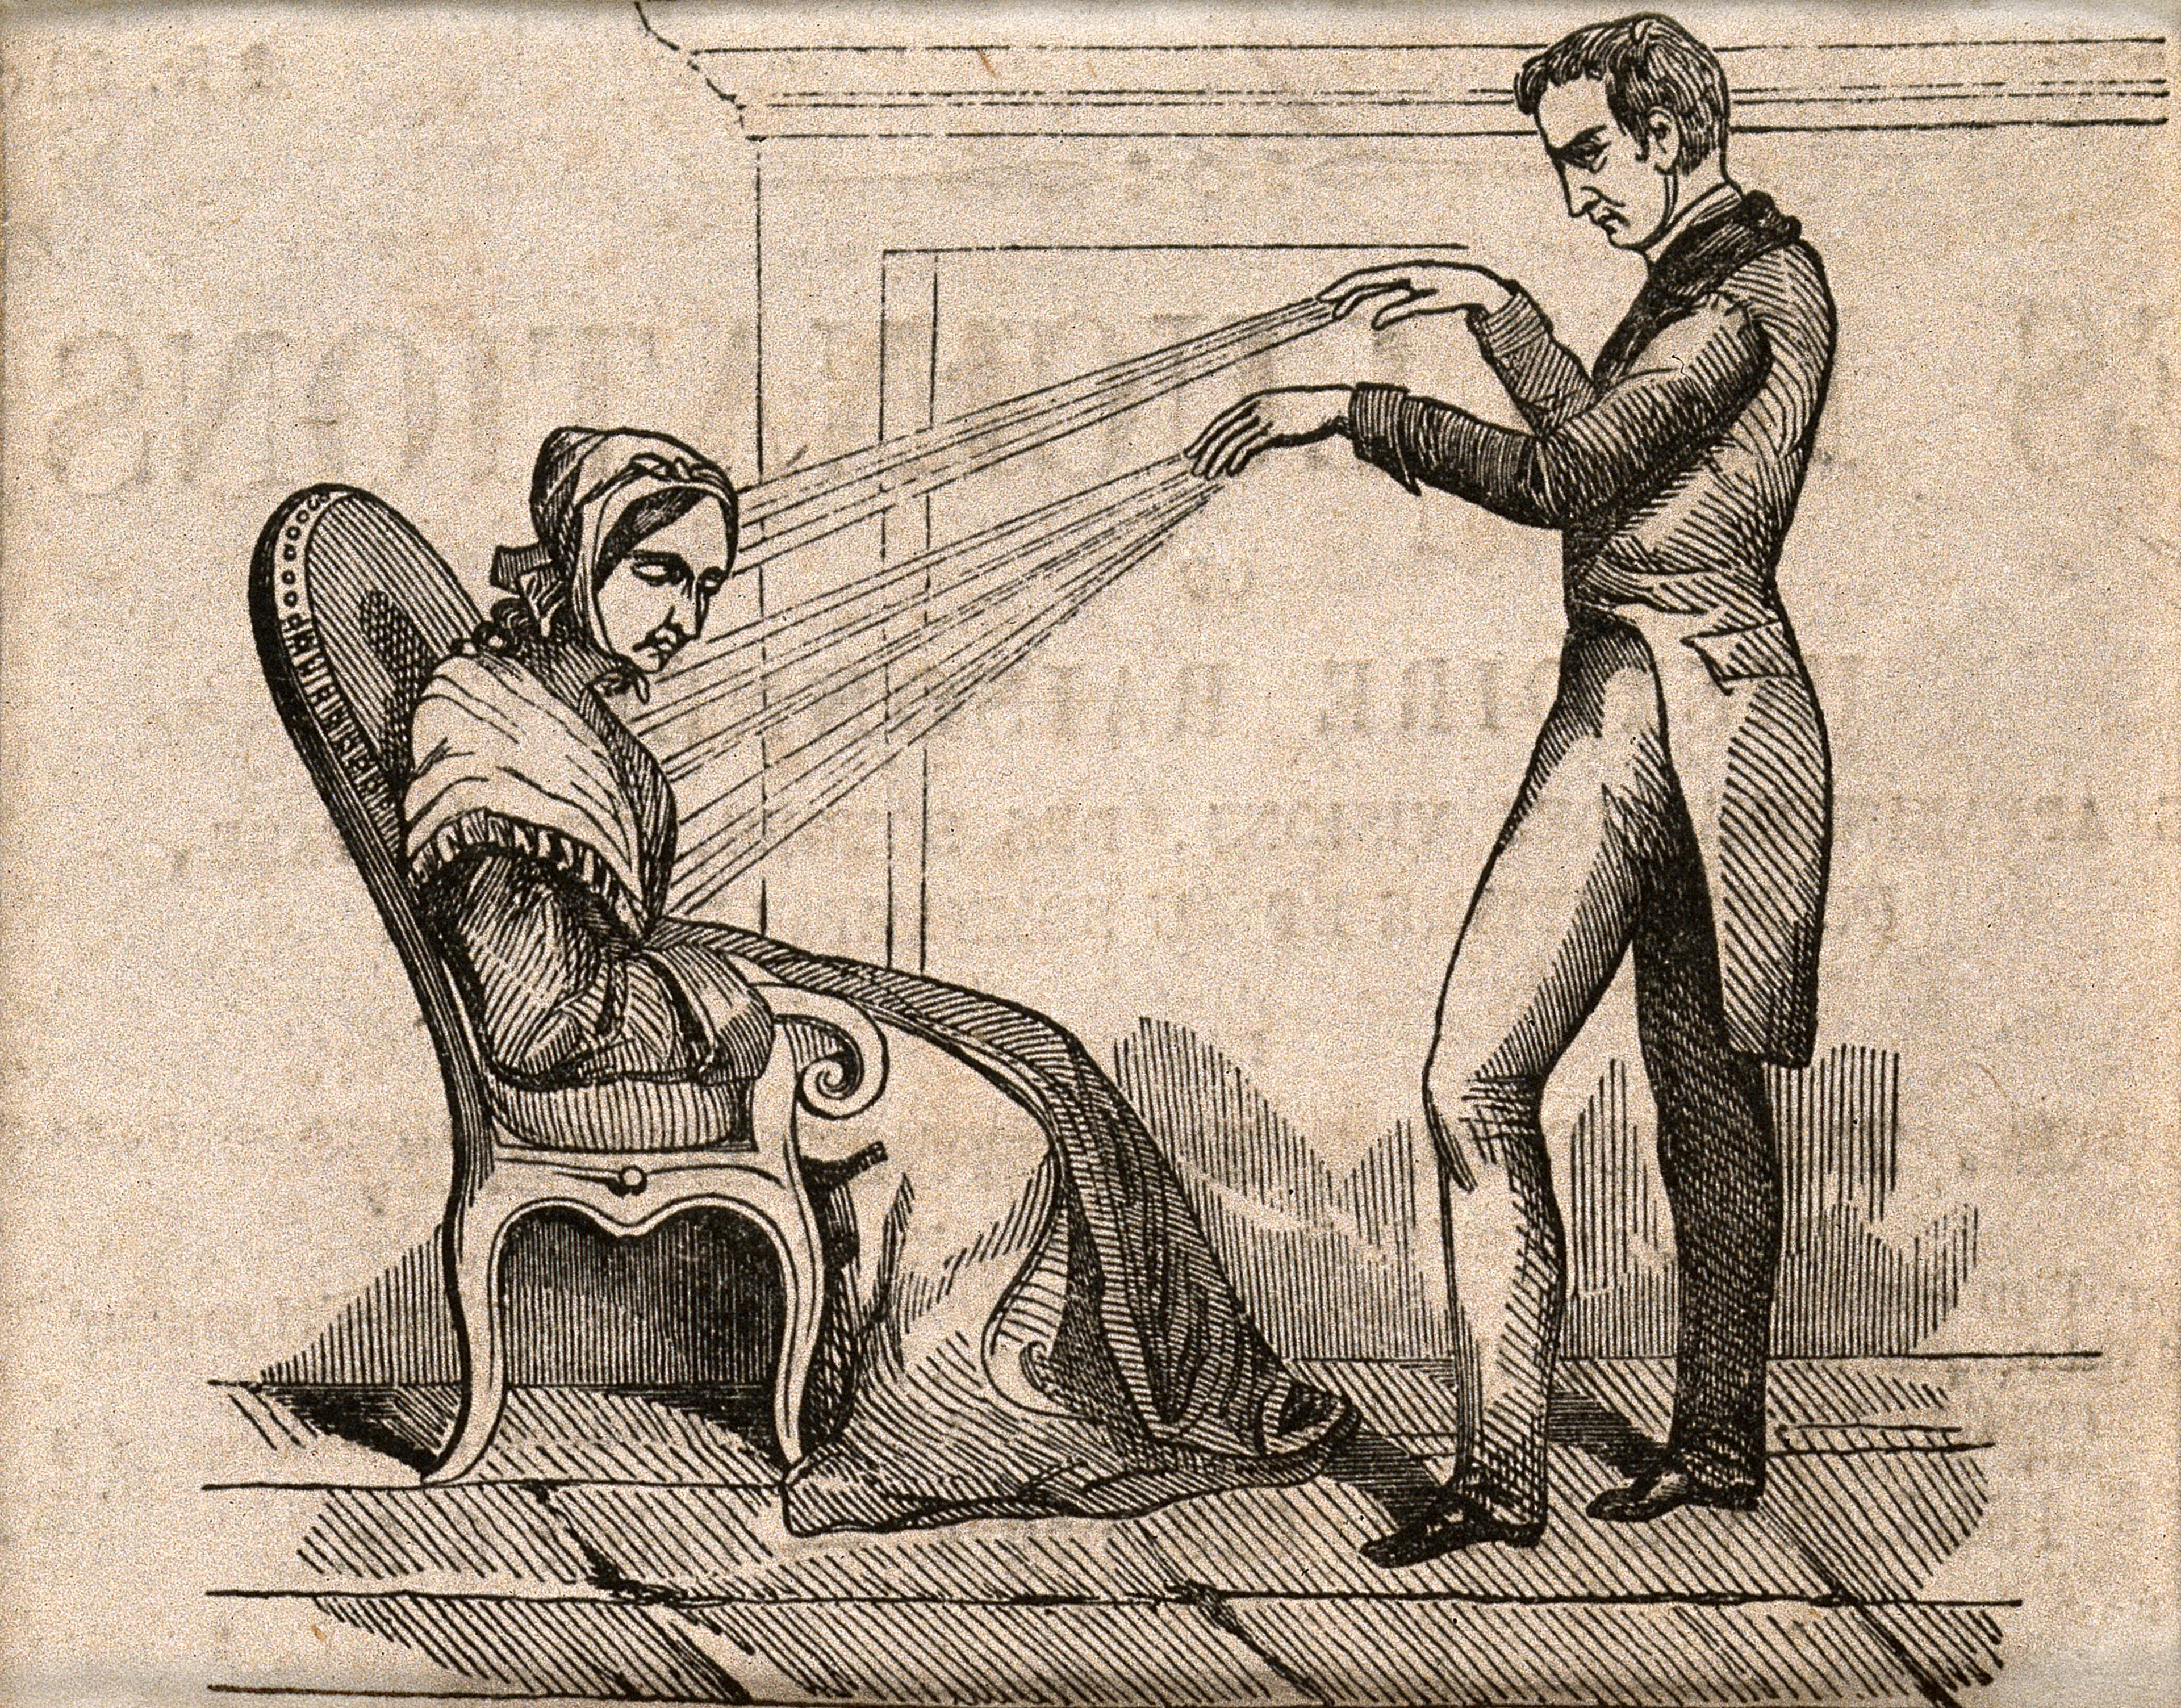 A mesmerist using animal magnetism on a seated female patient. Wood engraving, ca. 1845.